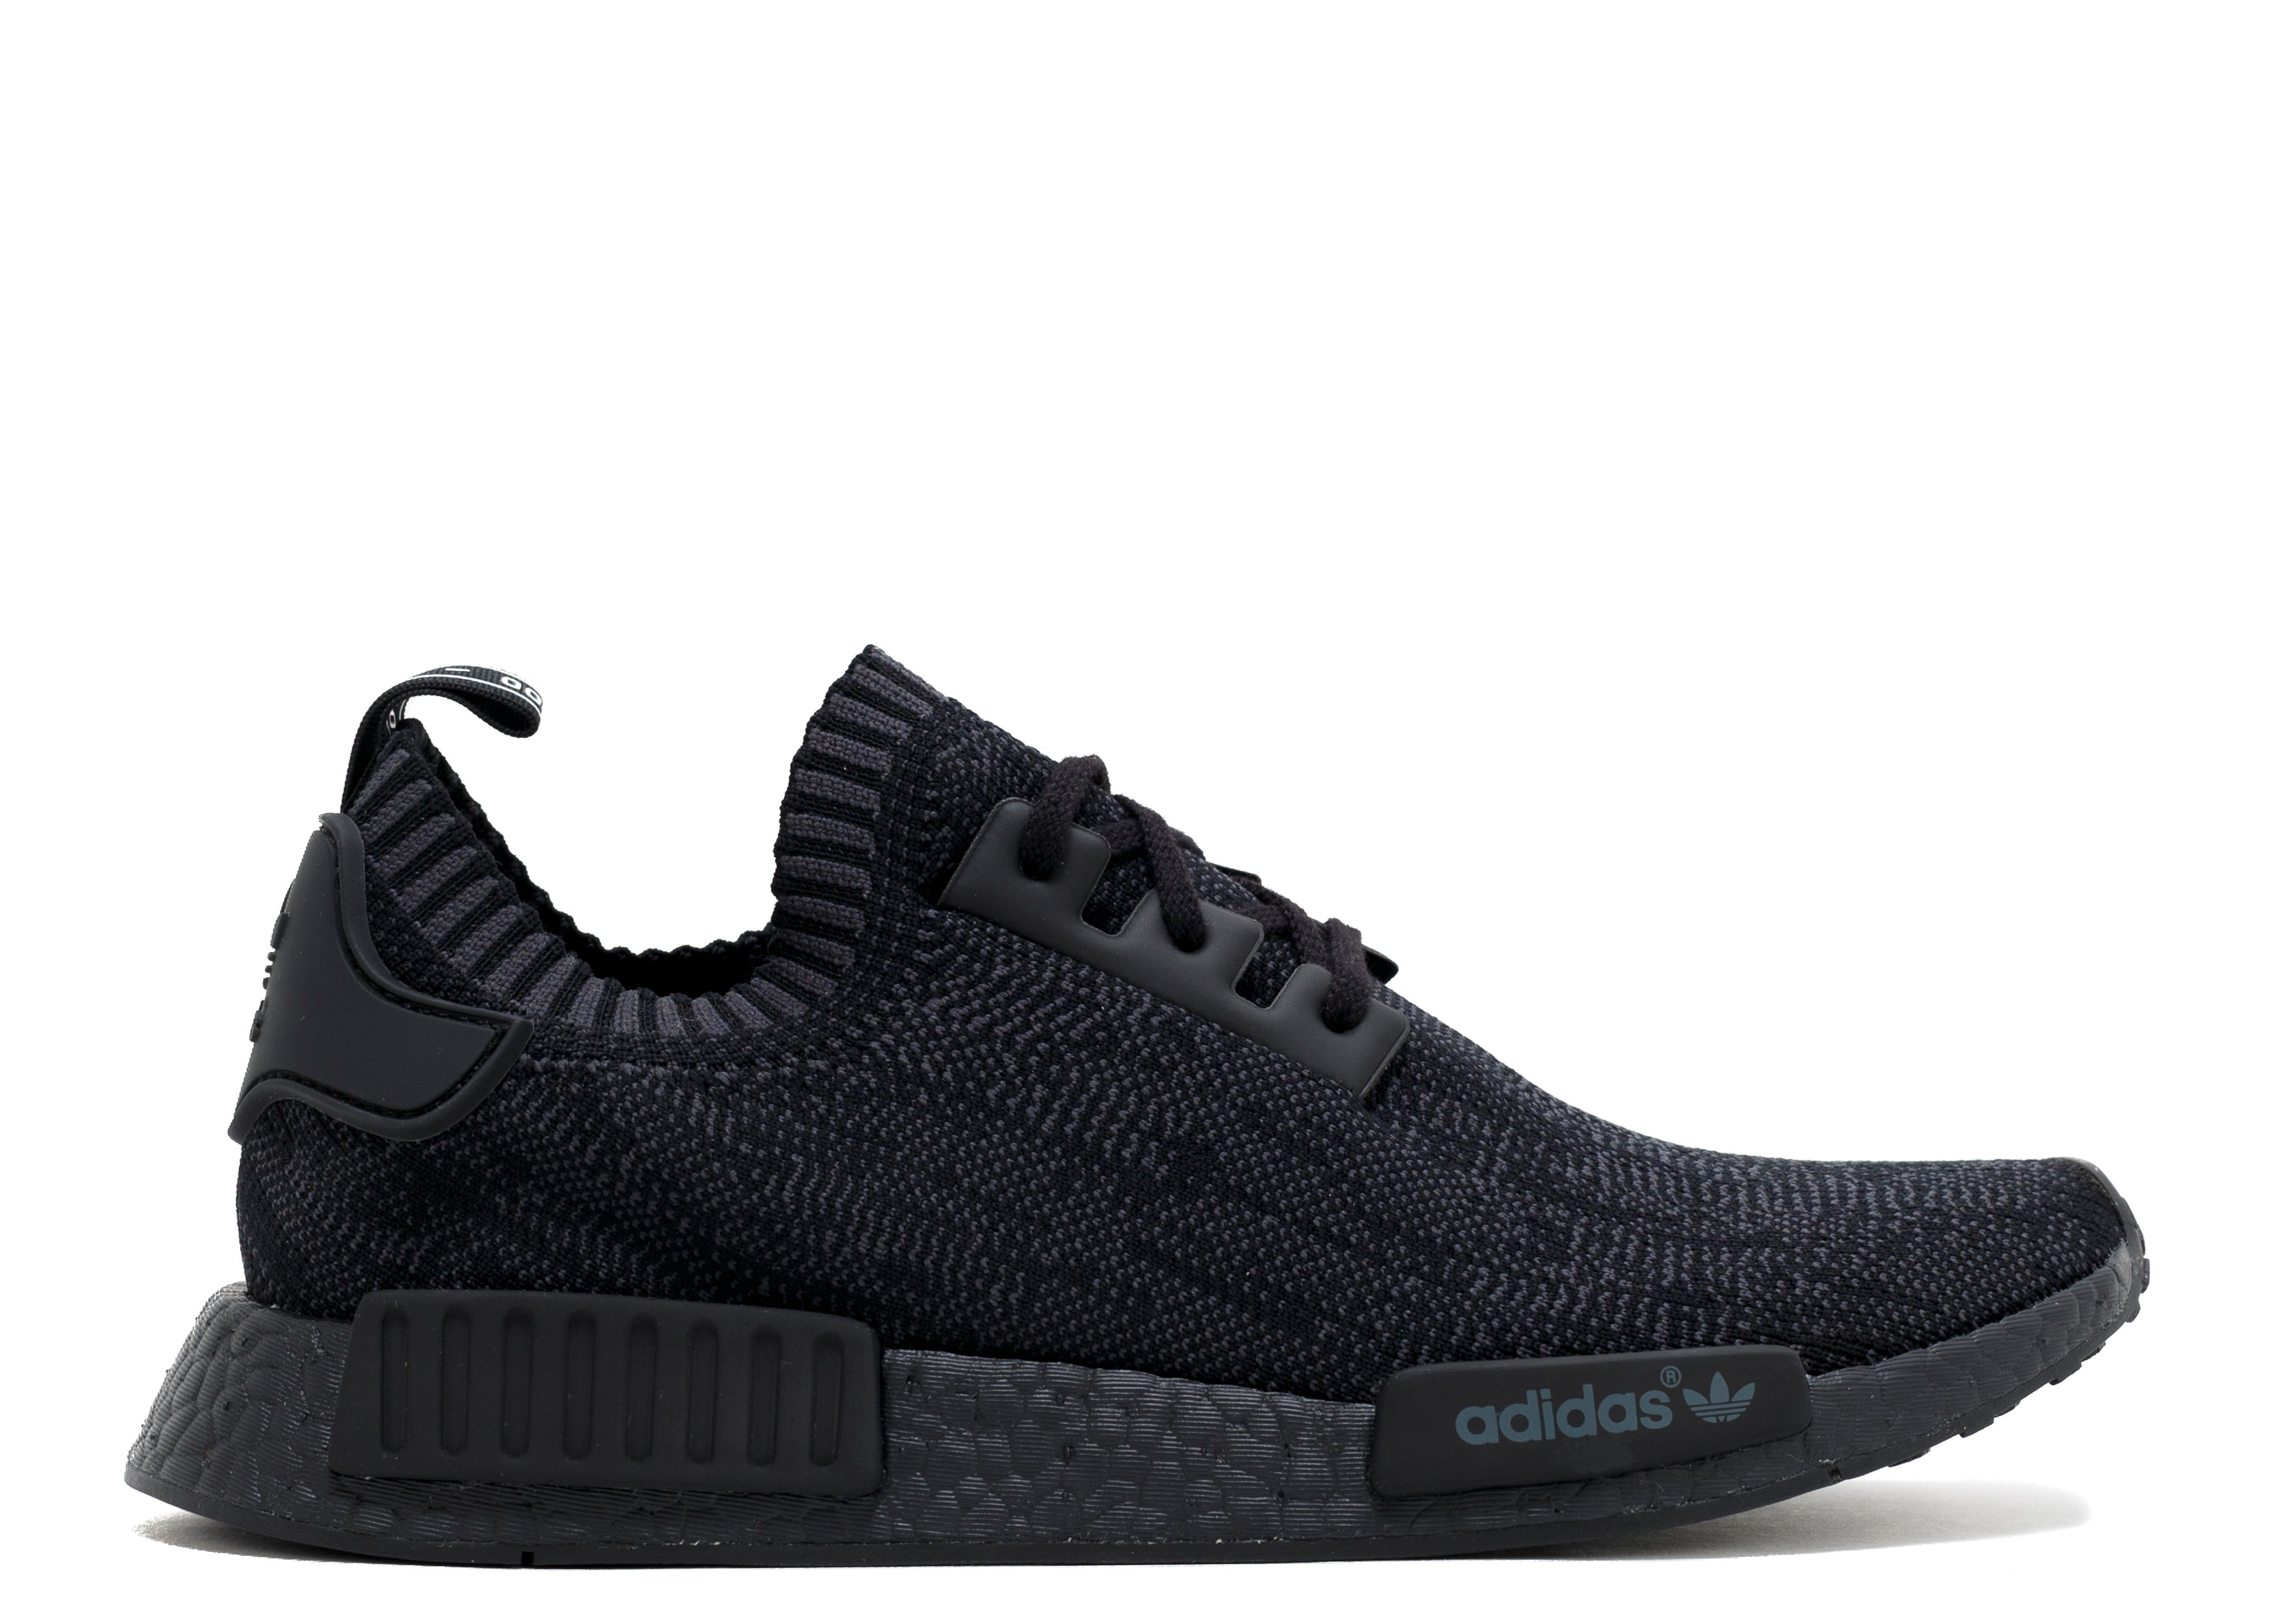 adidas nmd sneakers